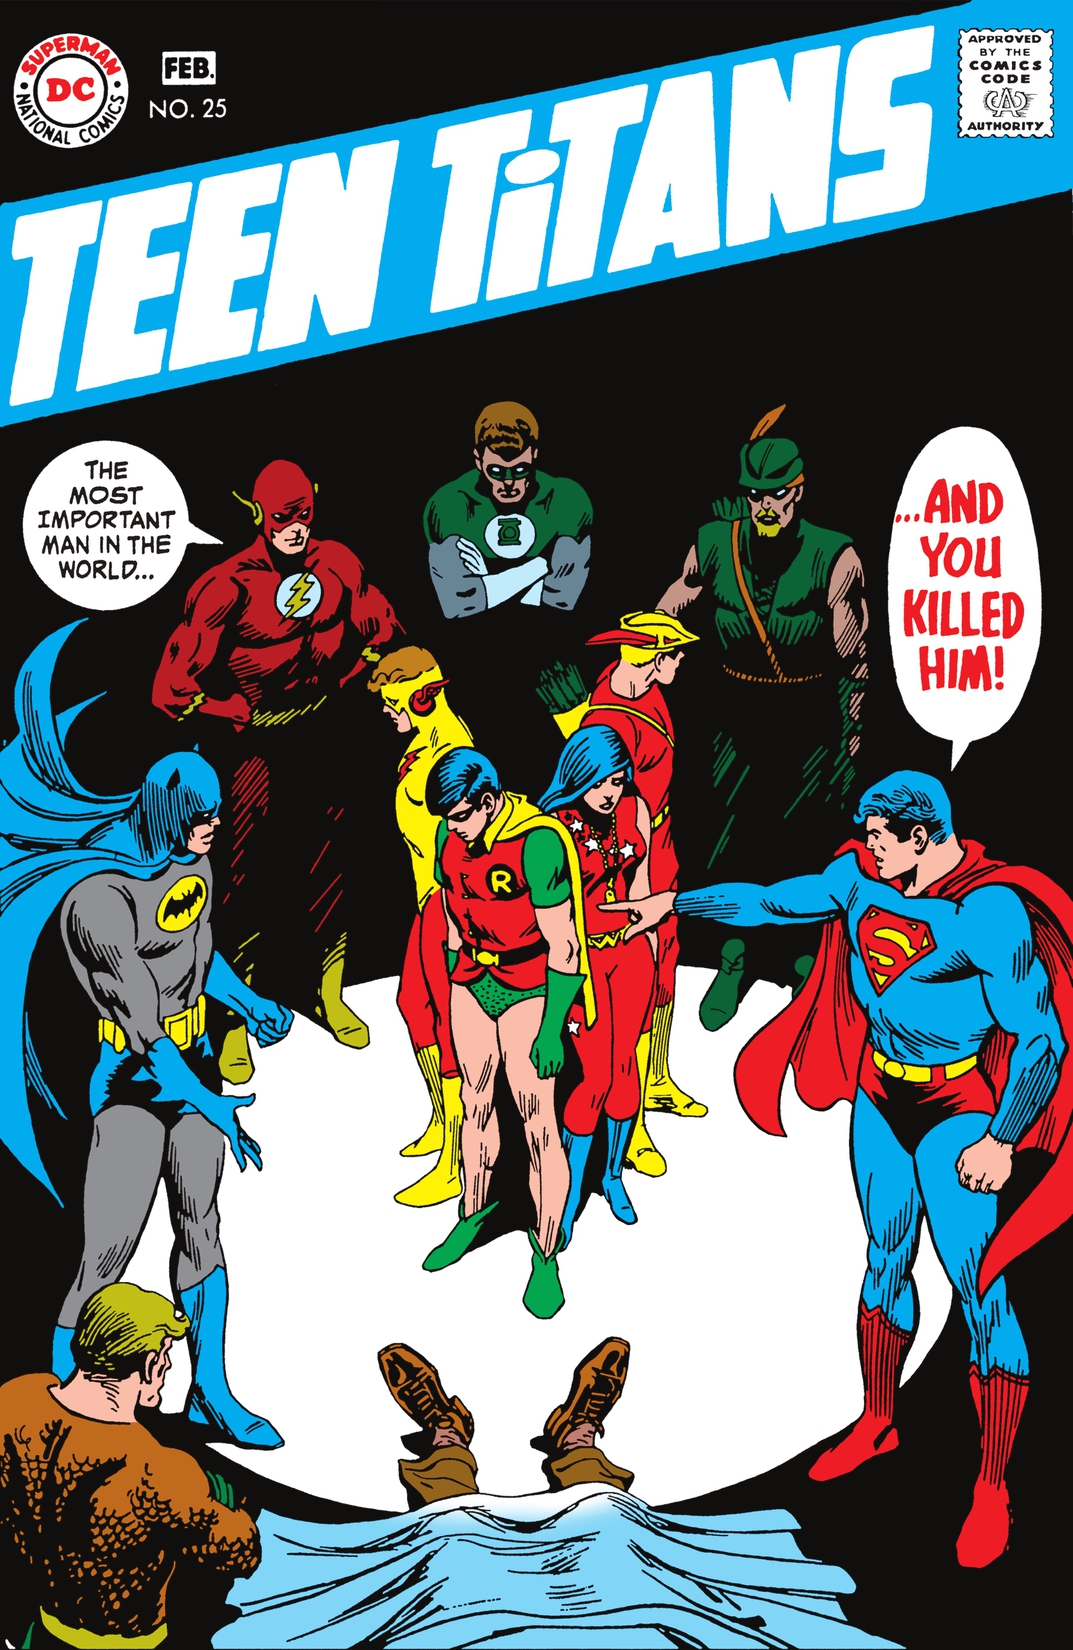 Teen Titans (1966-1978) #25 preview images